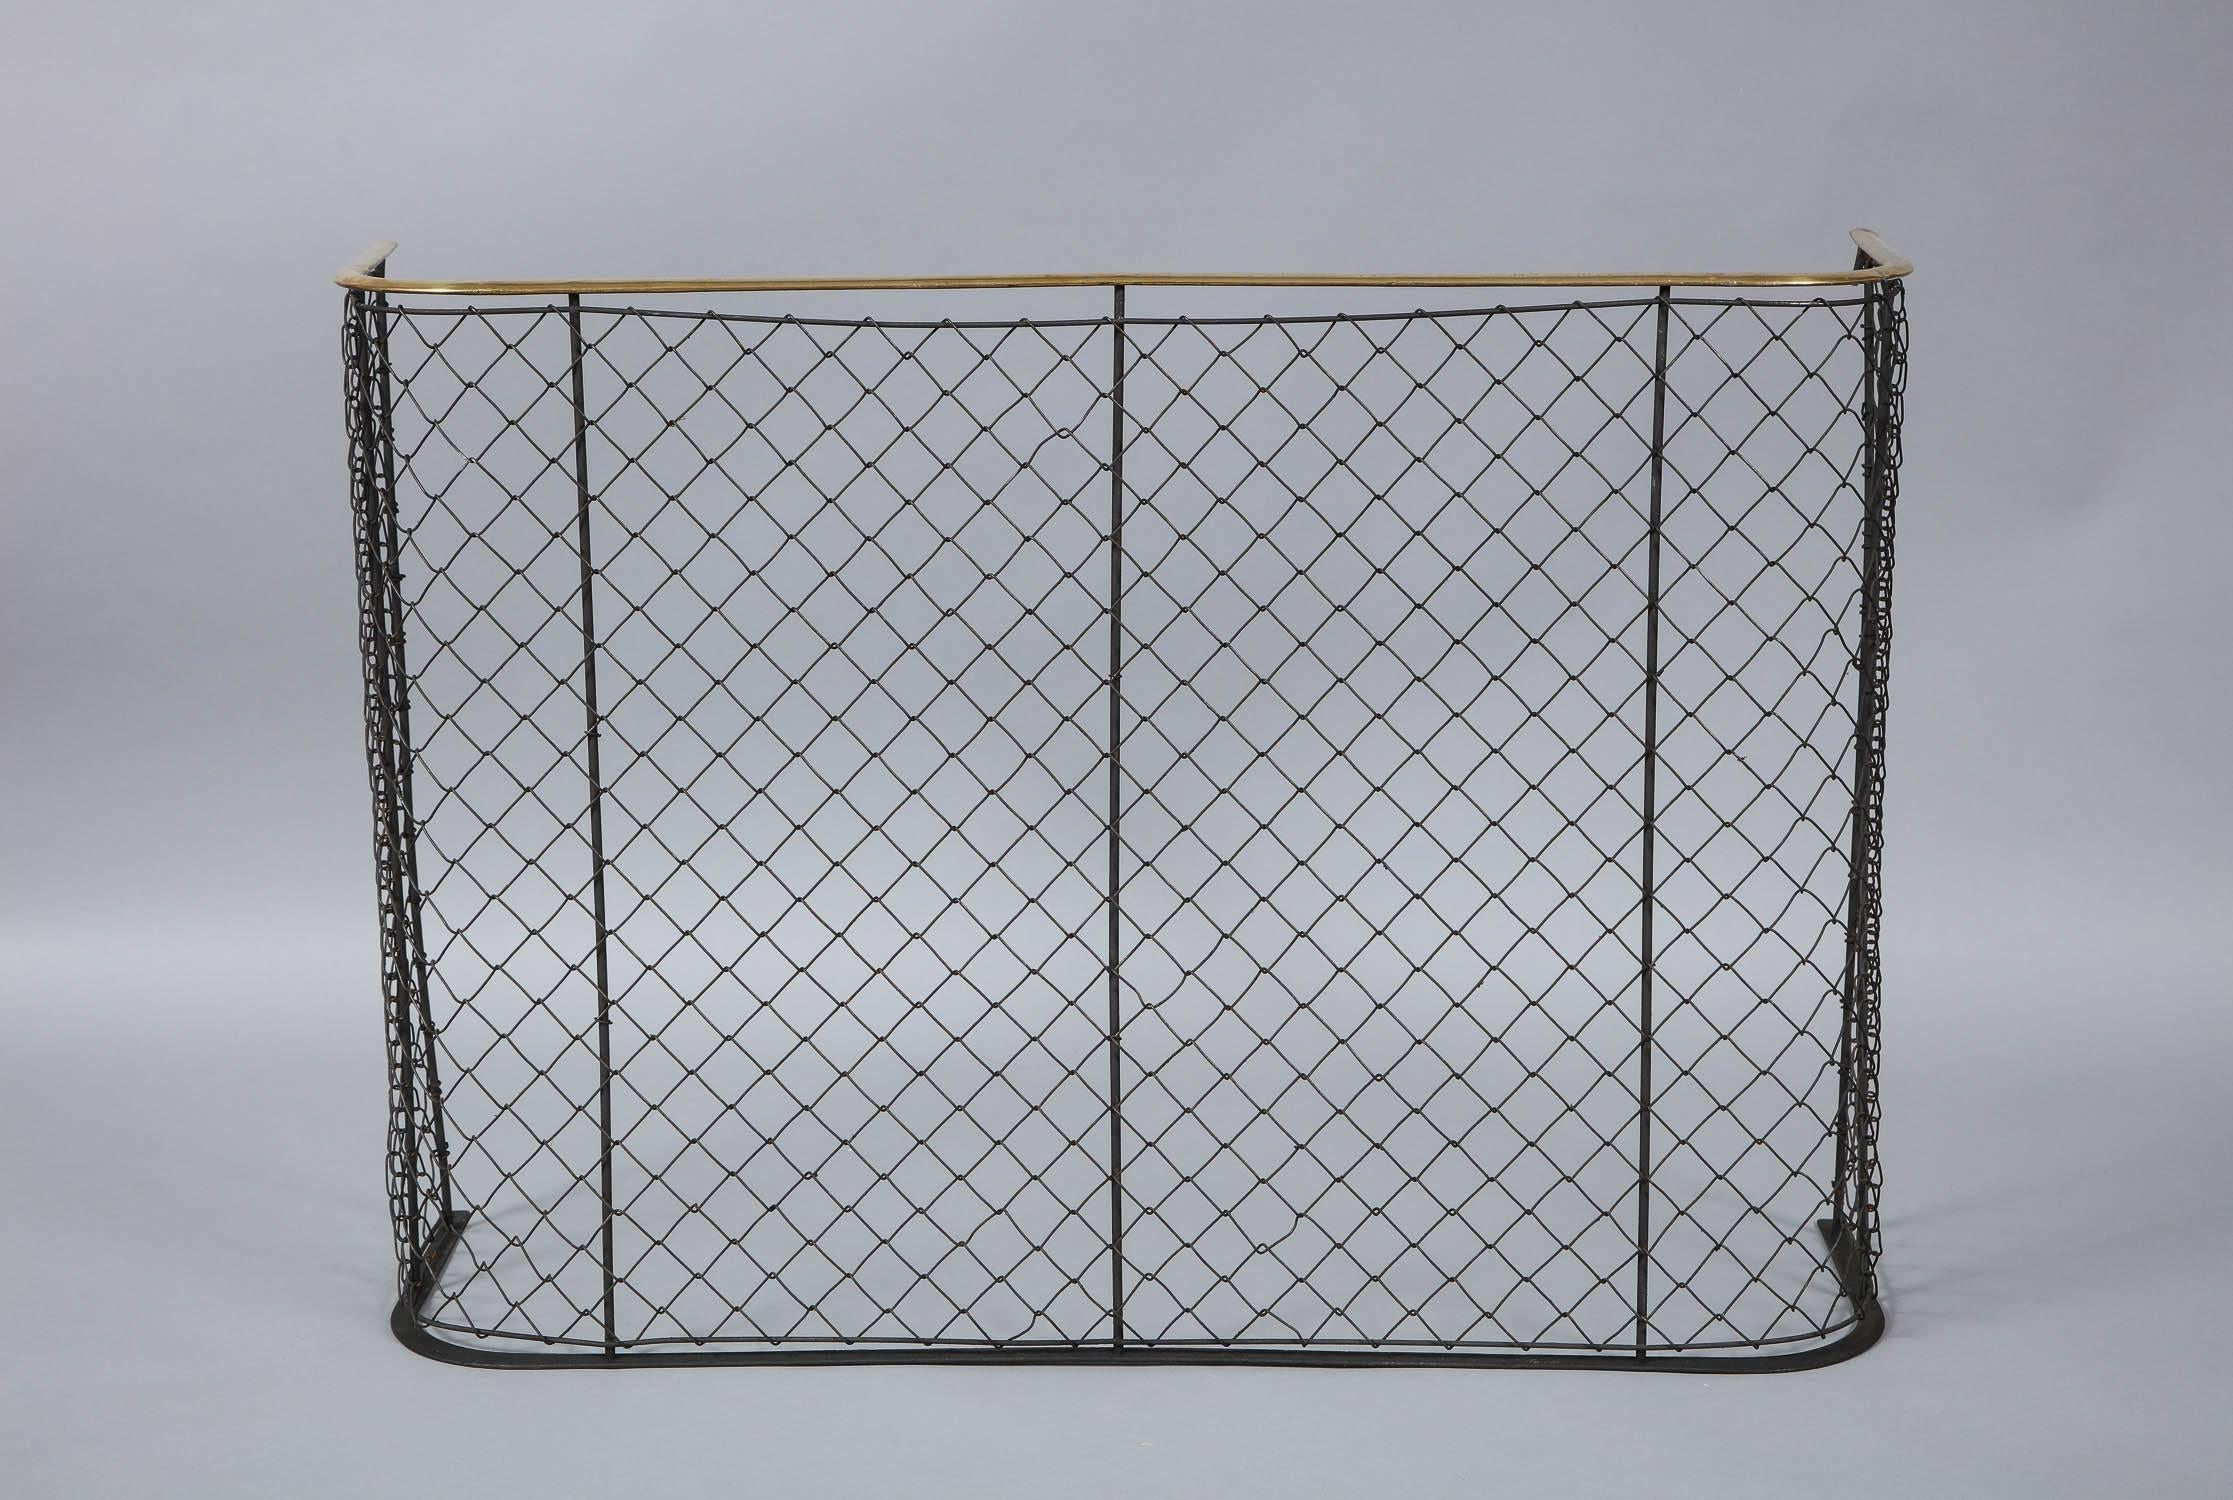 WE HAVE TWO LISTED THIS SIZE, BUT ONLY ONE IN PERSON

19th century English brass trimmed wrought iron and wirework nursery guard with wide 